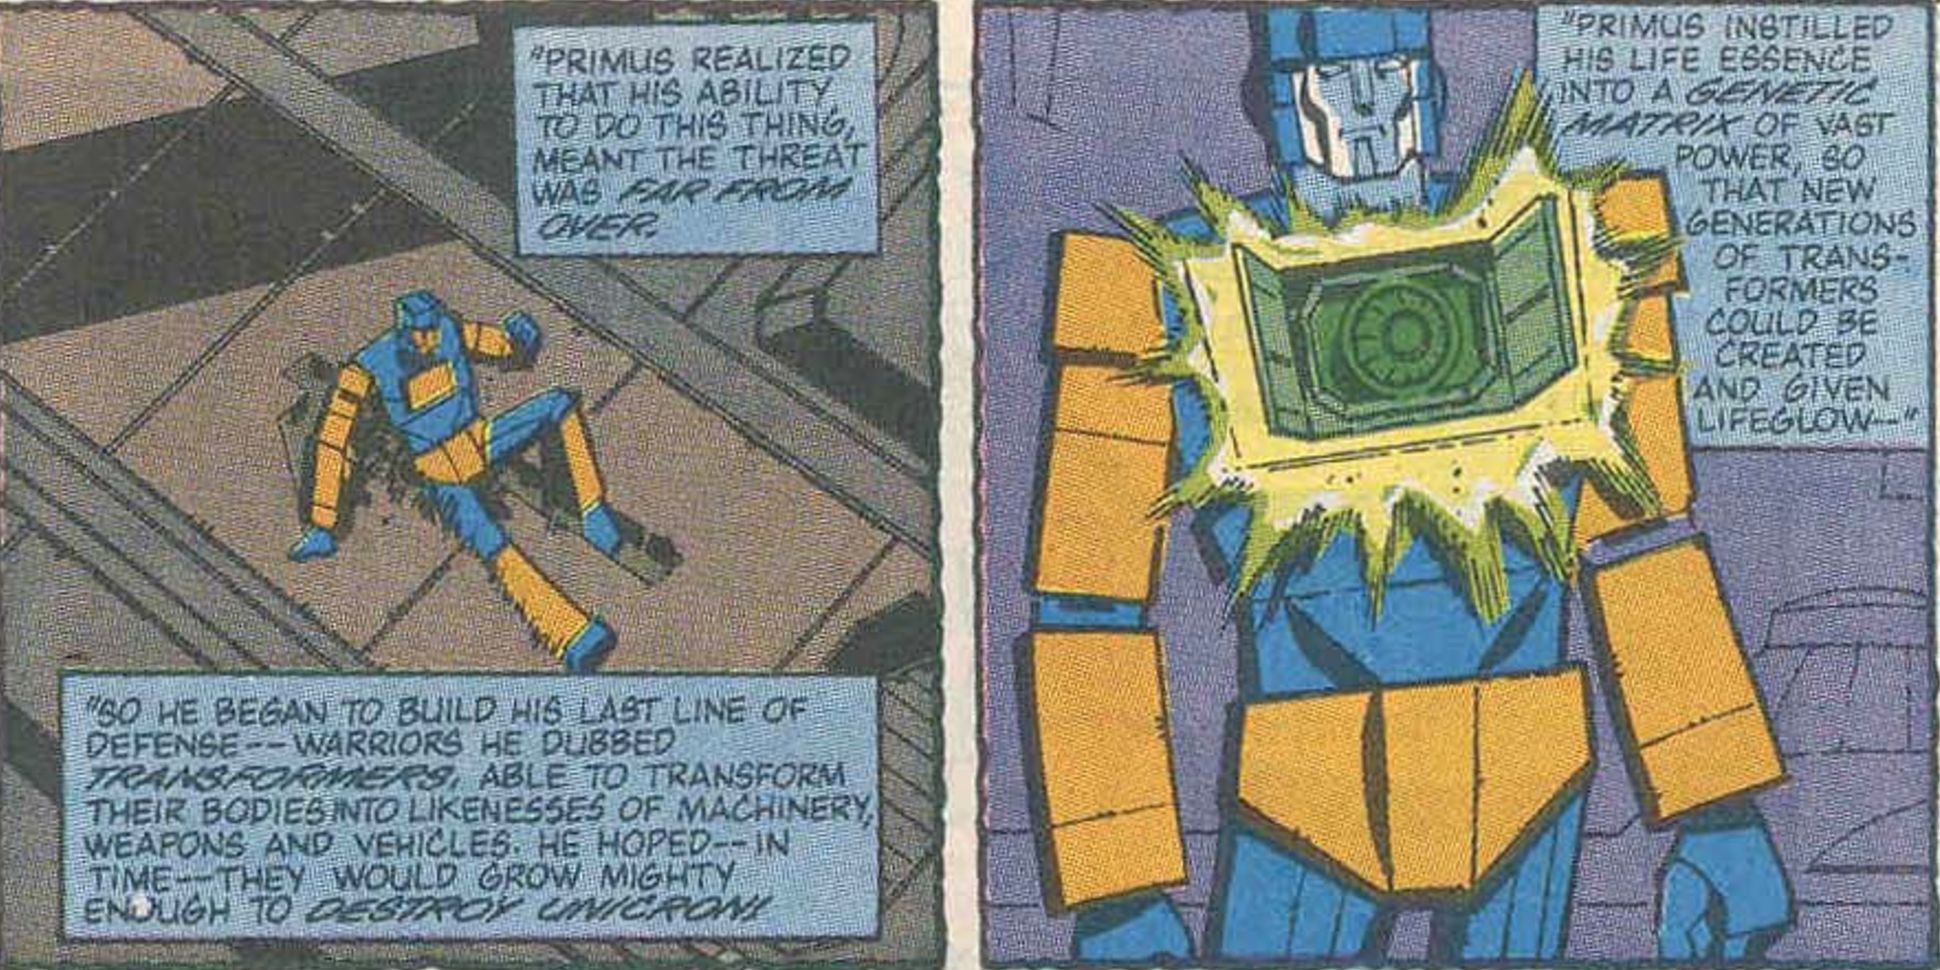 Primus Created Transformers As Living Weapons In The Comics